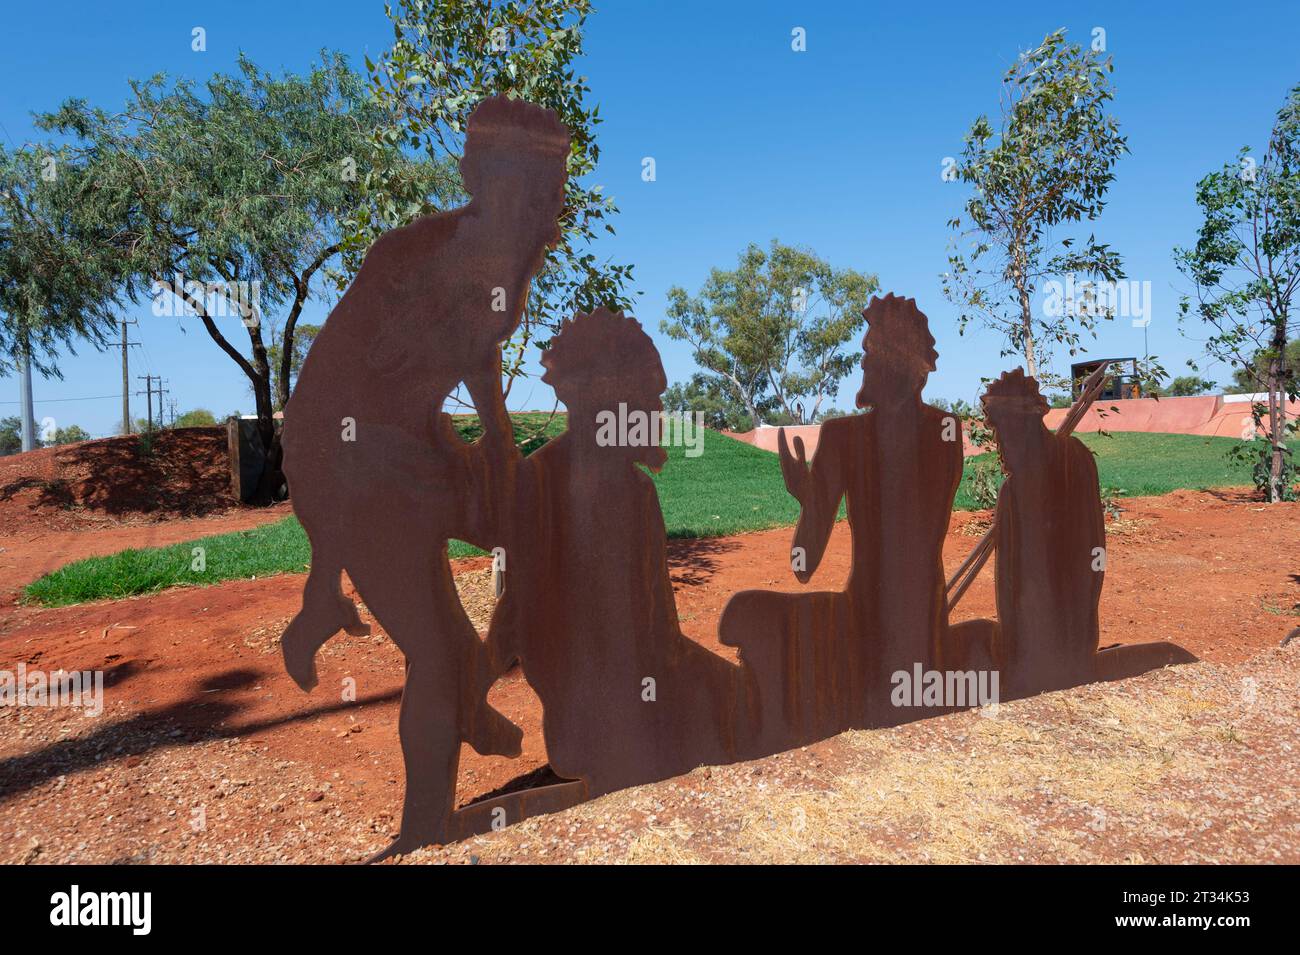 Metal sculptures depicting Aboriginal helpers in the 1906 Alfred Canning expedition to map the Canning Stock Route, Wiluna, Western Australia, Austral Stock Photo